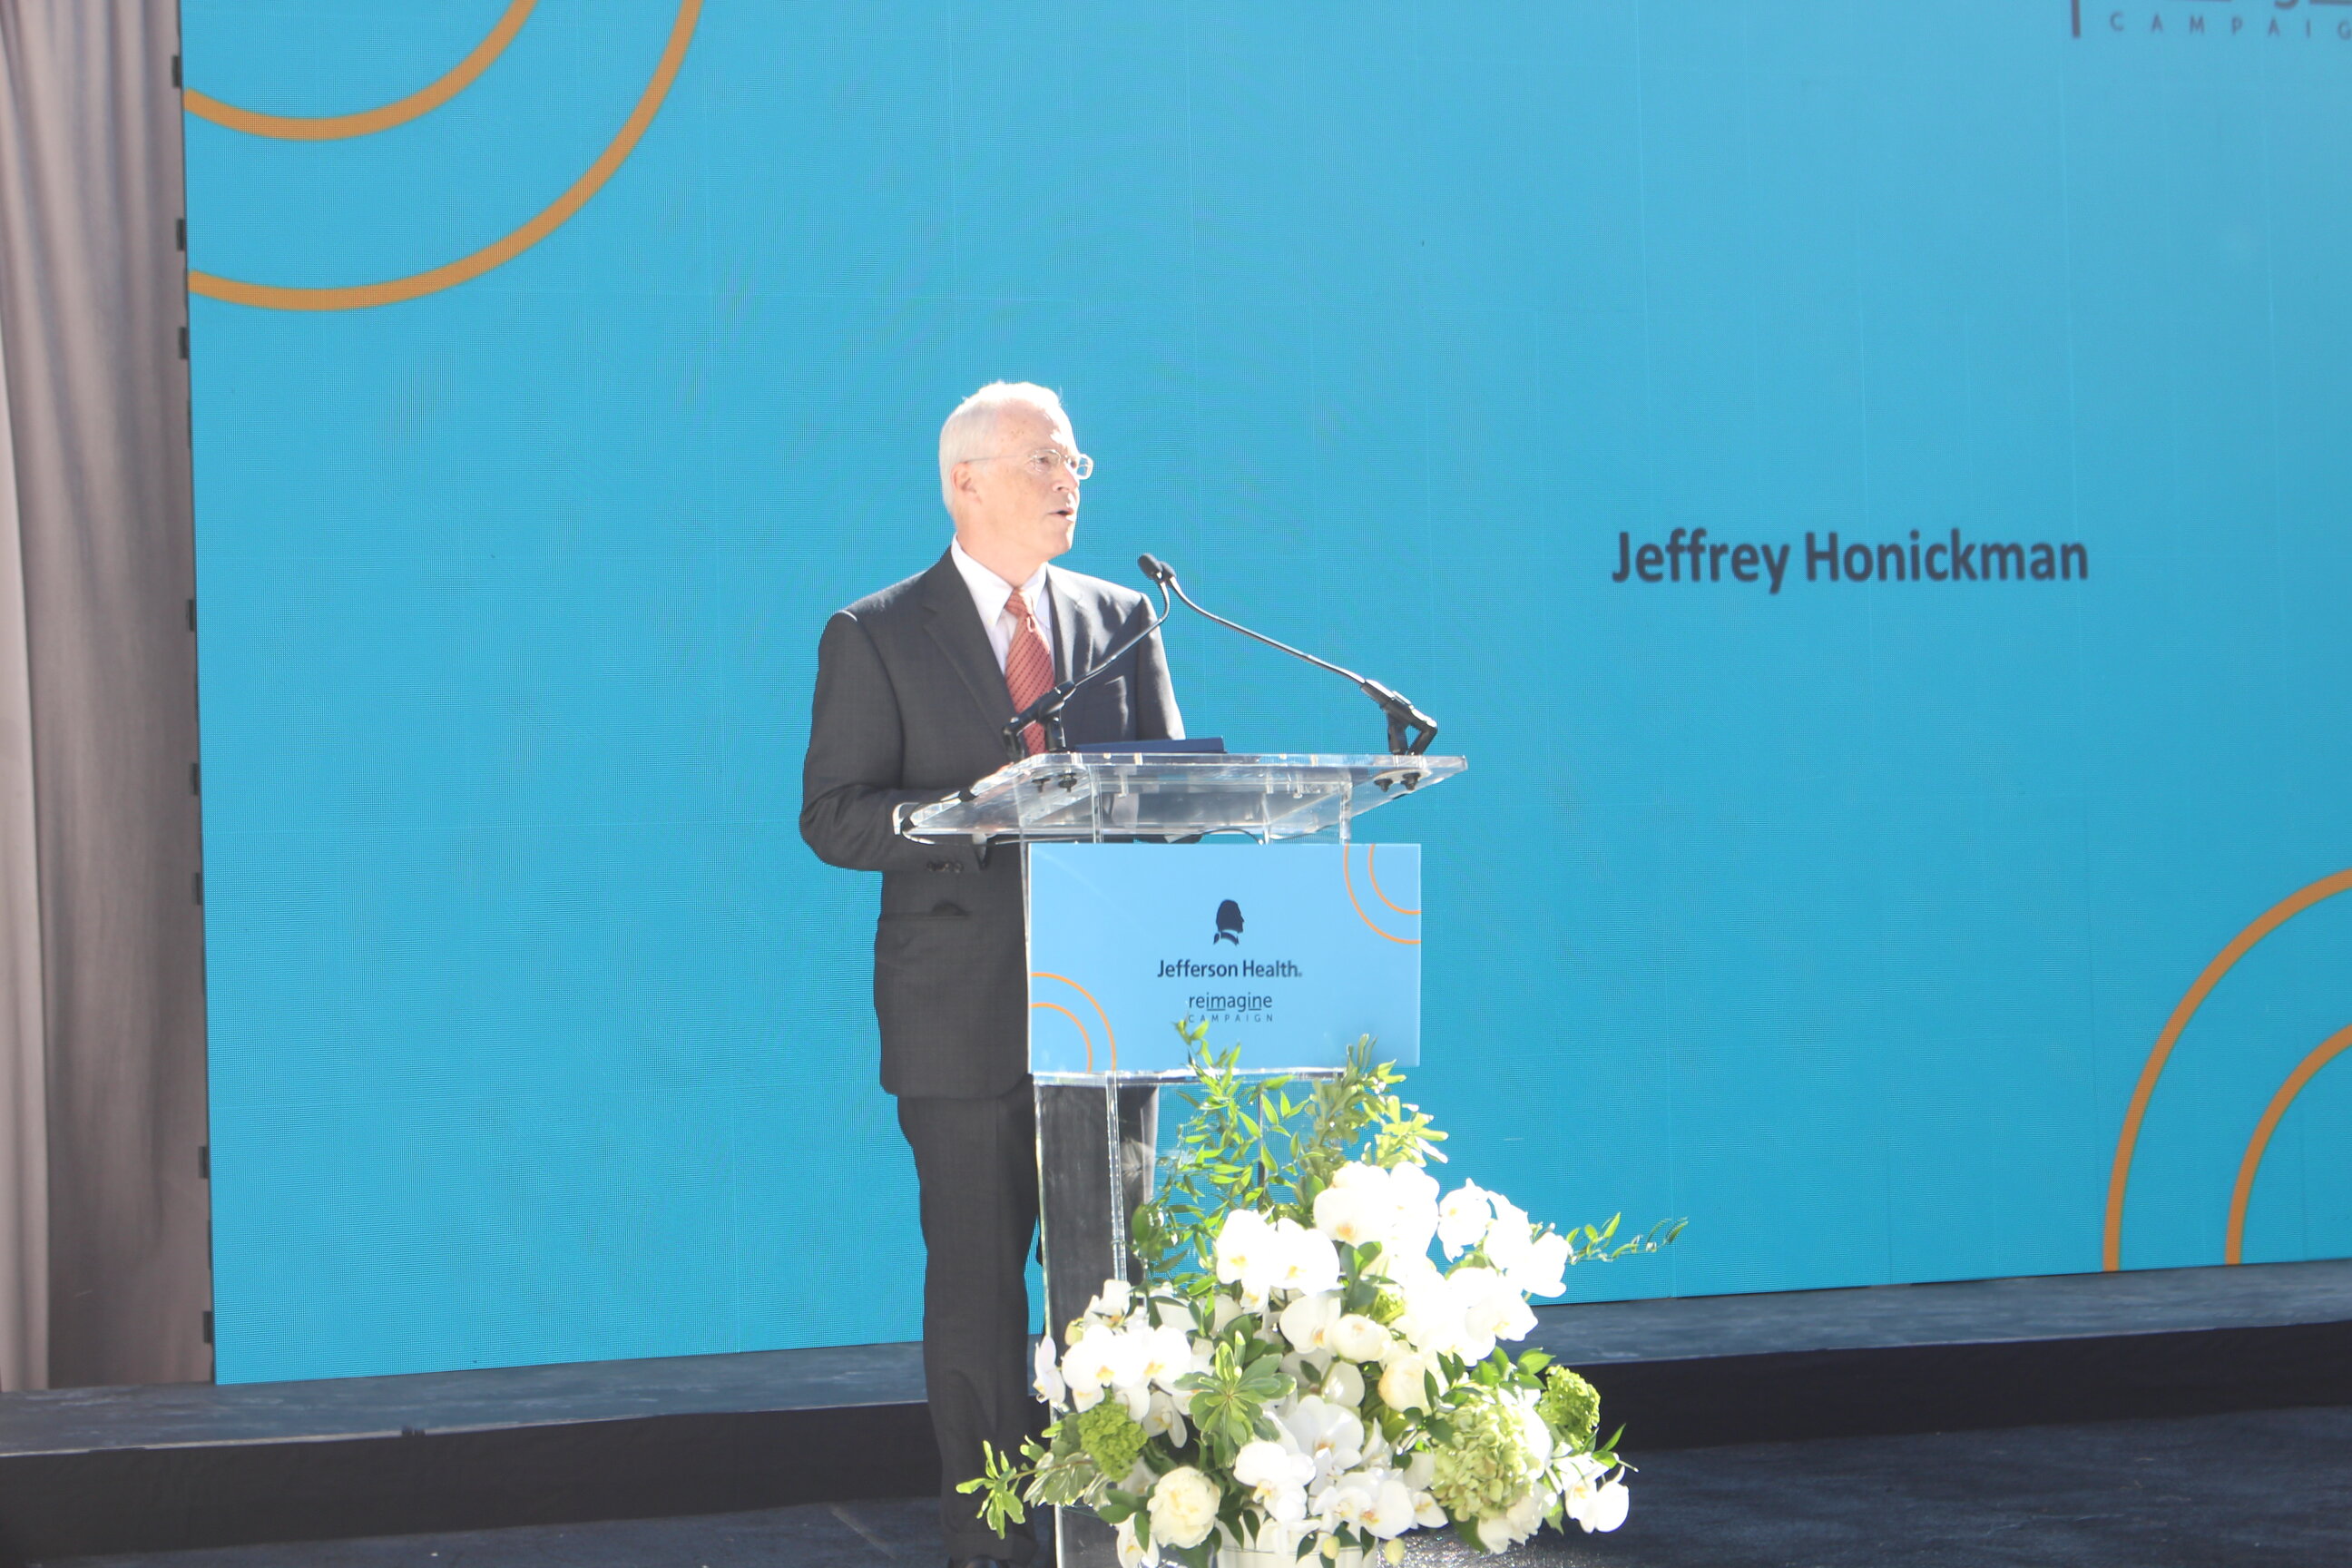 Jeffrey Honickman speaks after the announcement that Jefferson's new facility is in his family's name. Photo: Jensen Toussaint/AL DÍA News.